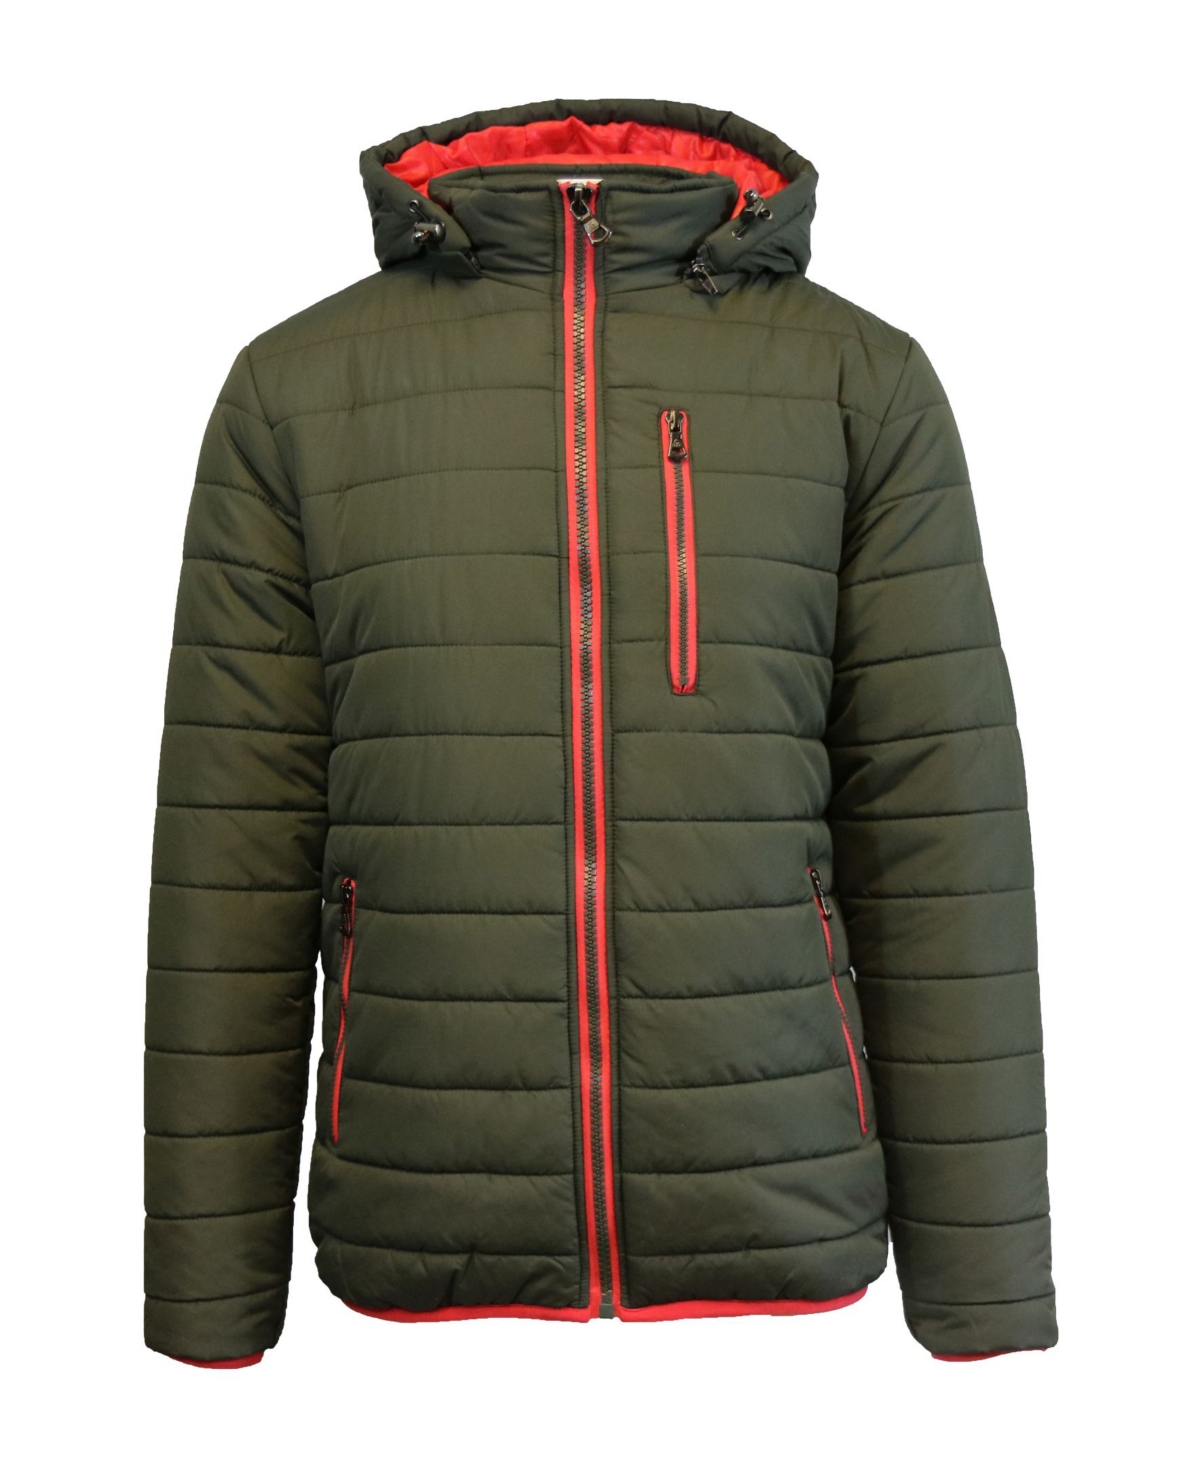 Spire By Galaxy Men's Puffer Bubble Jacket with Contrast Trim - Olive-Red